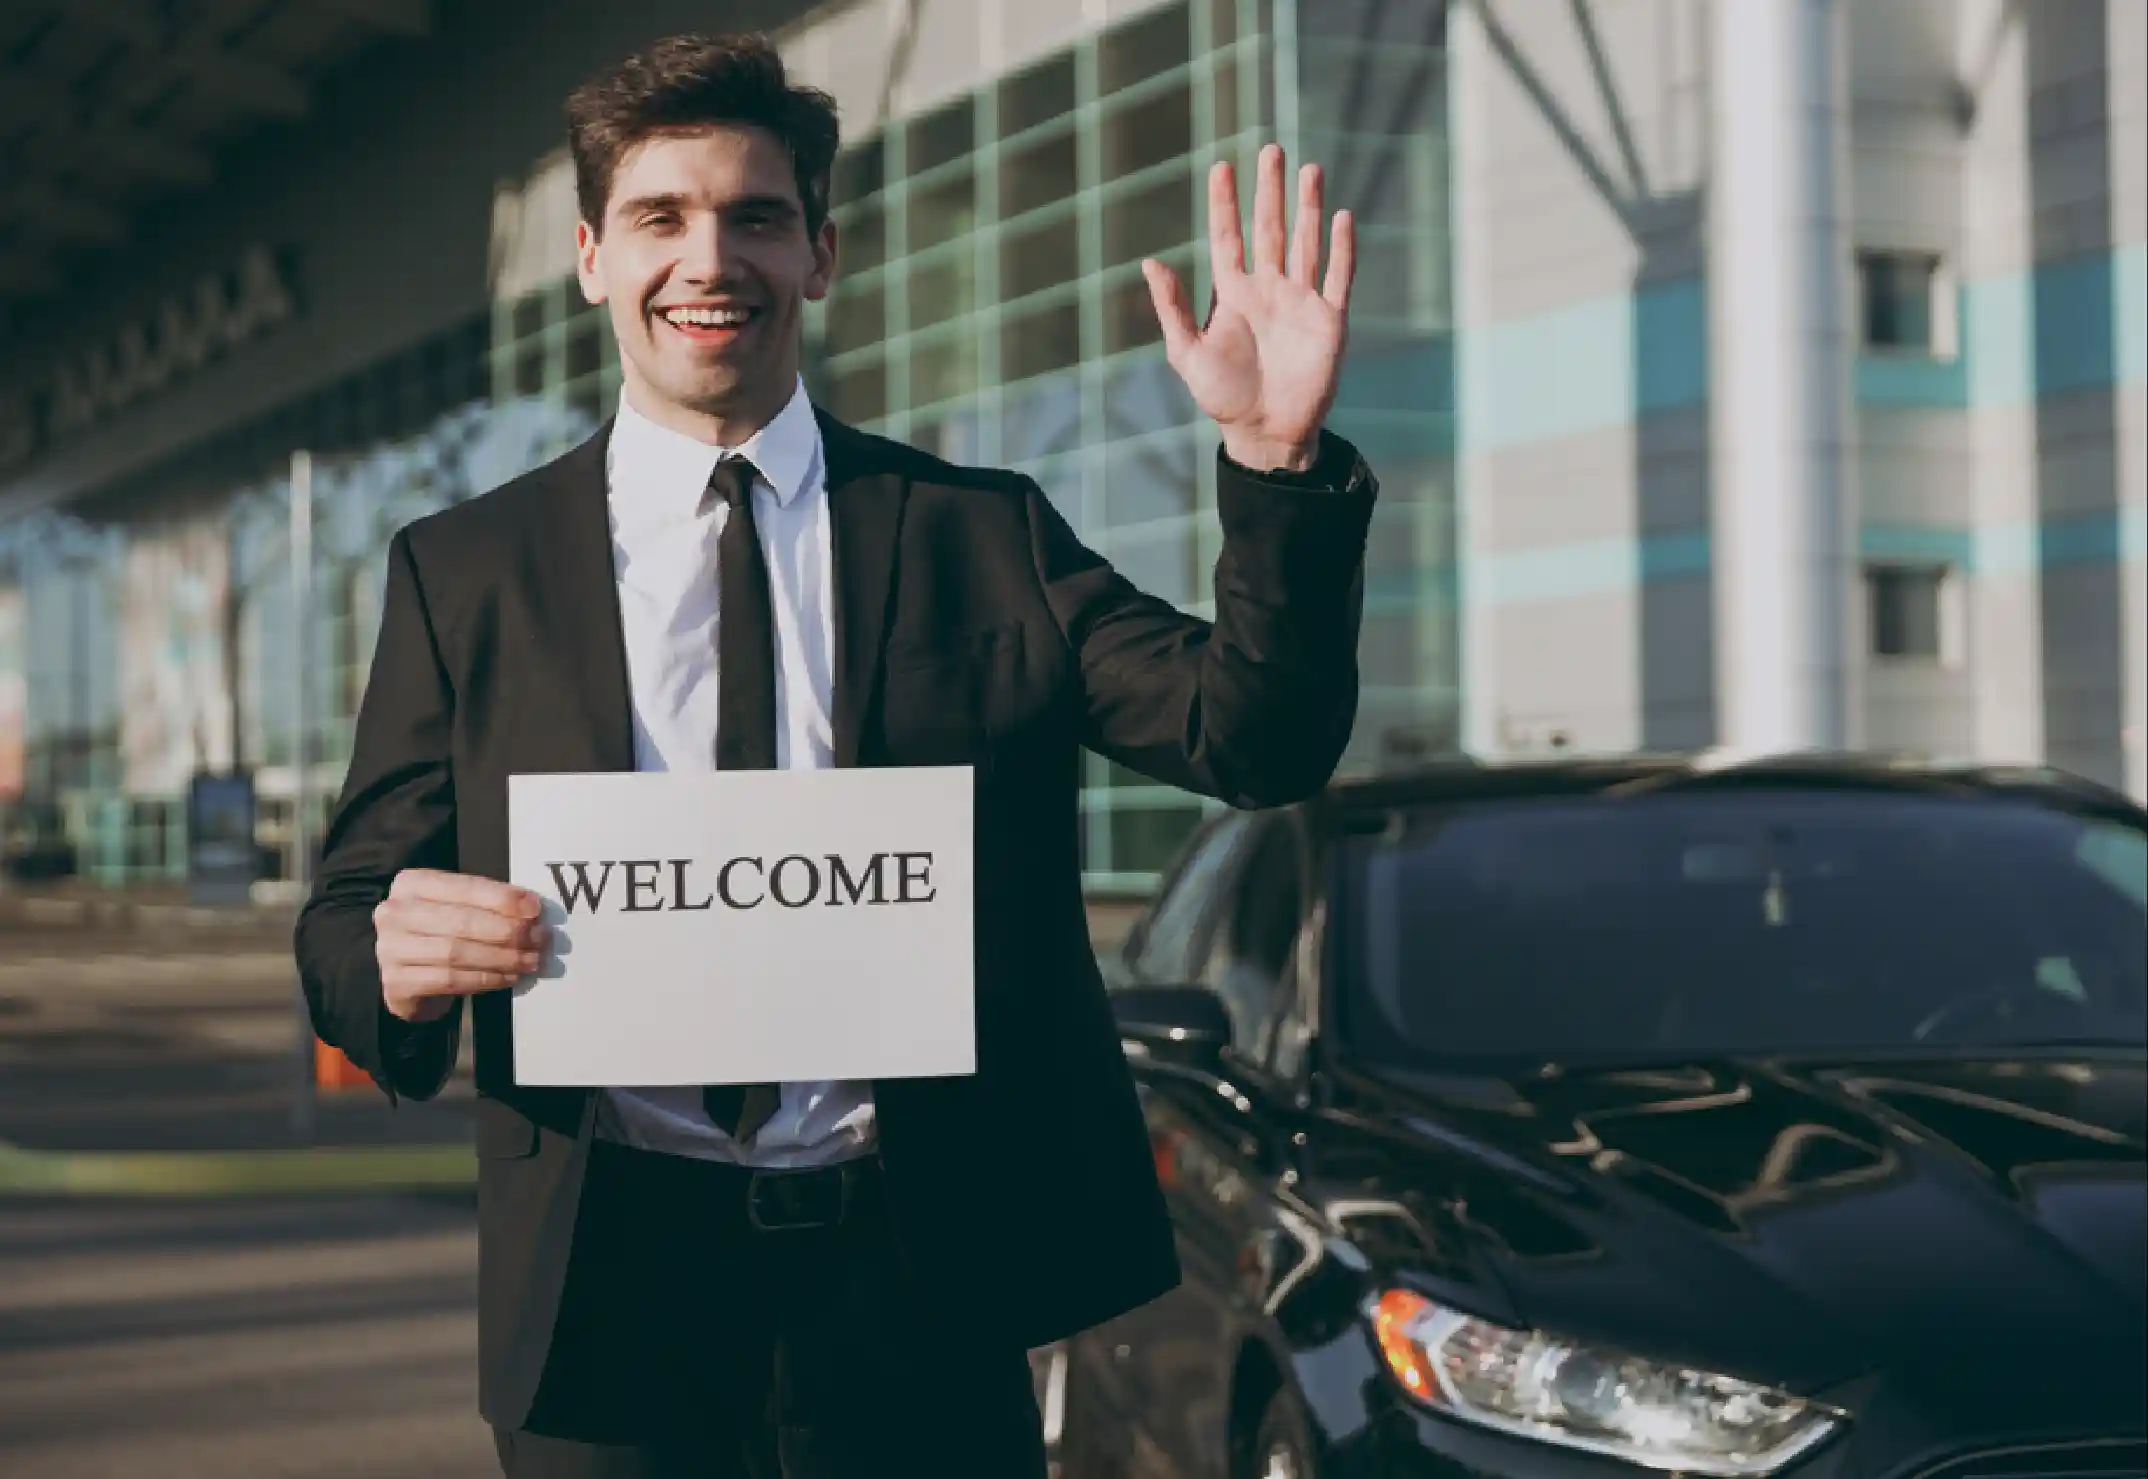 #Meet and Greet Services, #Make Your Airport Experience, # Your parents memorable